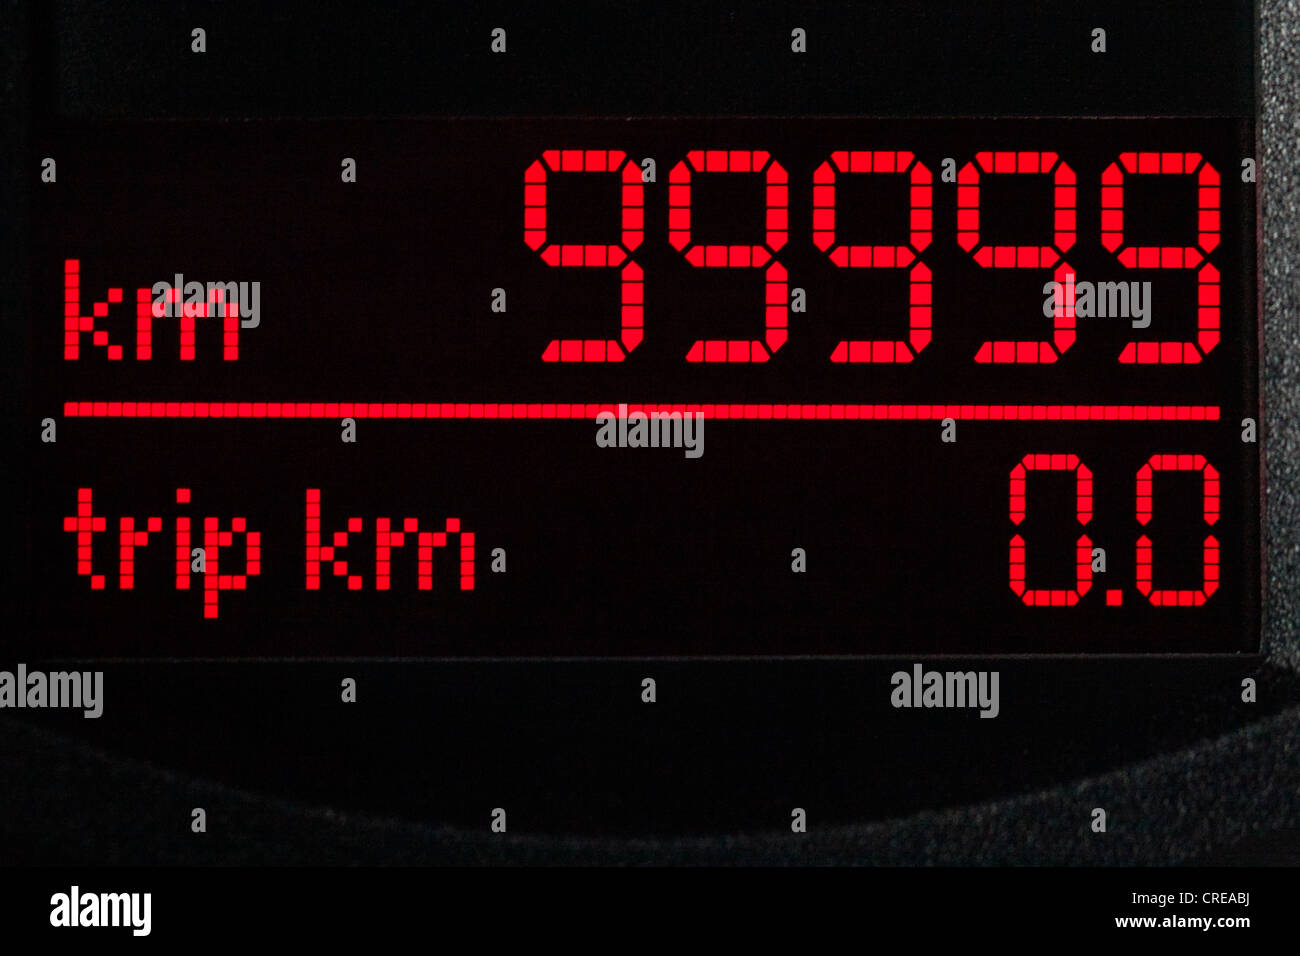 Speedometer, mileage of 99, 999 kilometers in the instrument panel in the cockpit of a Volkswagen, VW Stock Photo